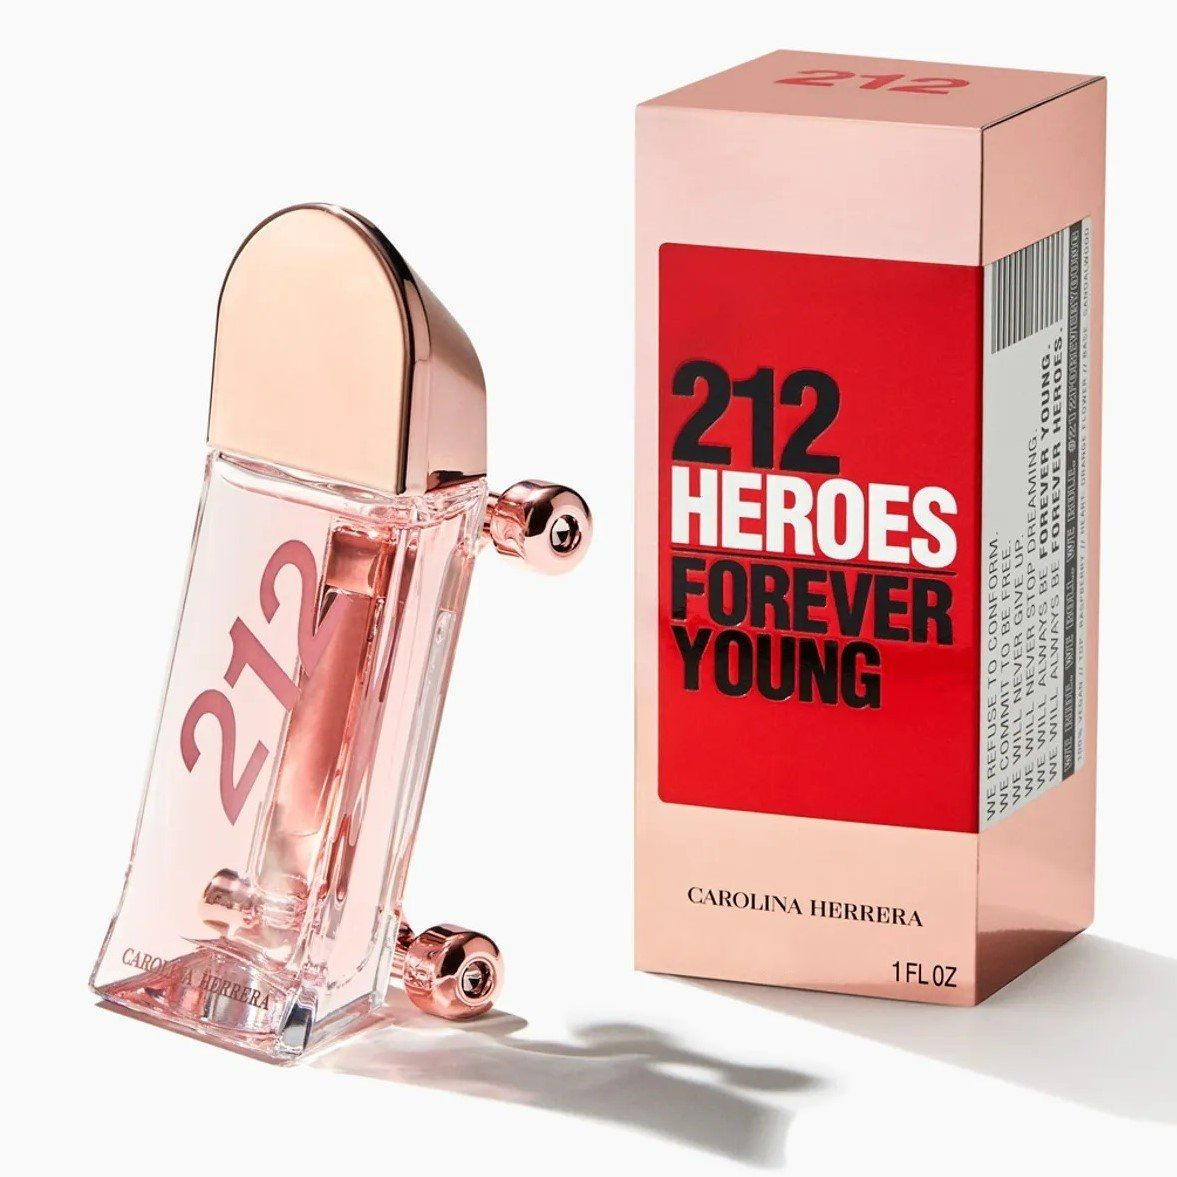 NƯỚC HOA NỮ 212 HEROES FOR HER FOREVER YOUNG EDP 1